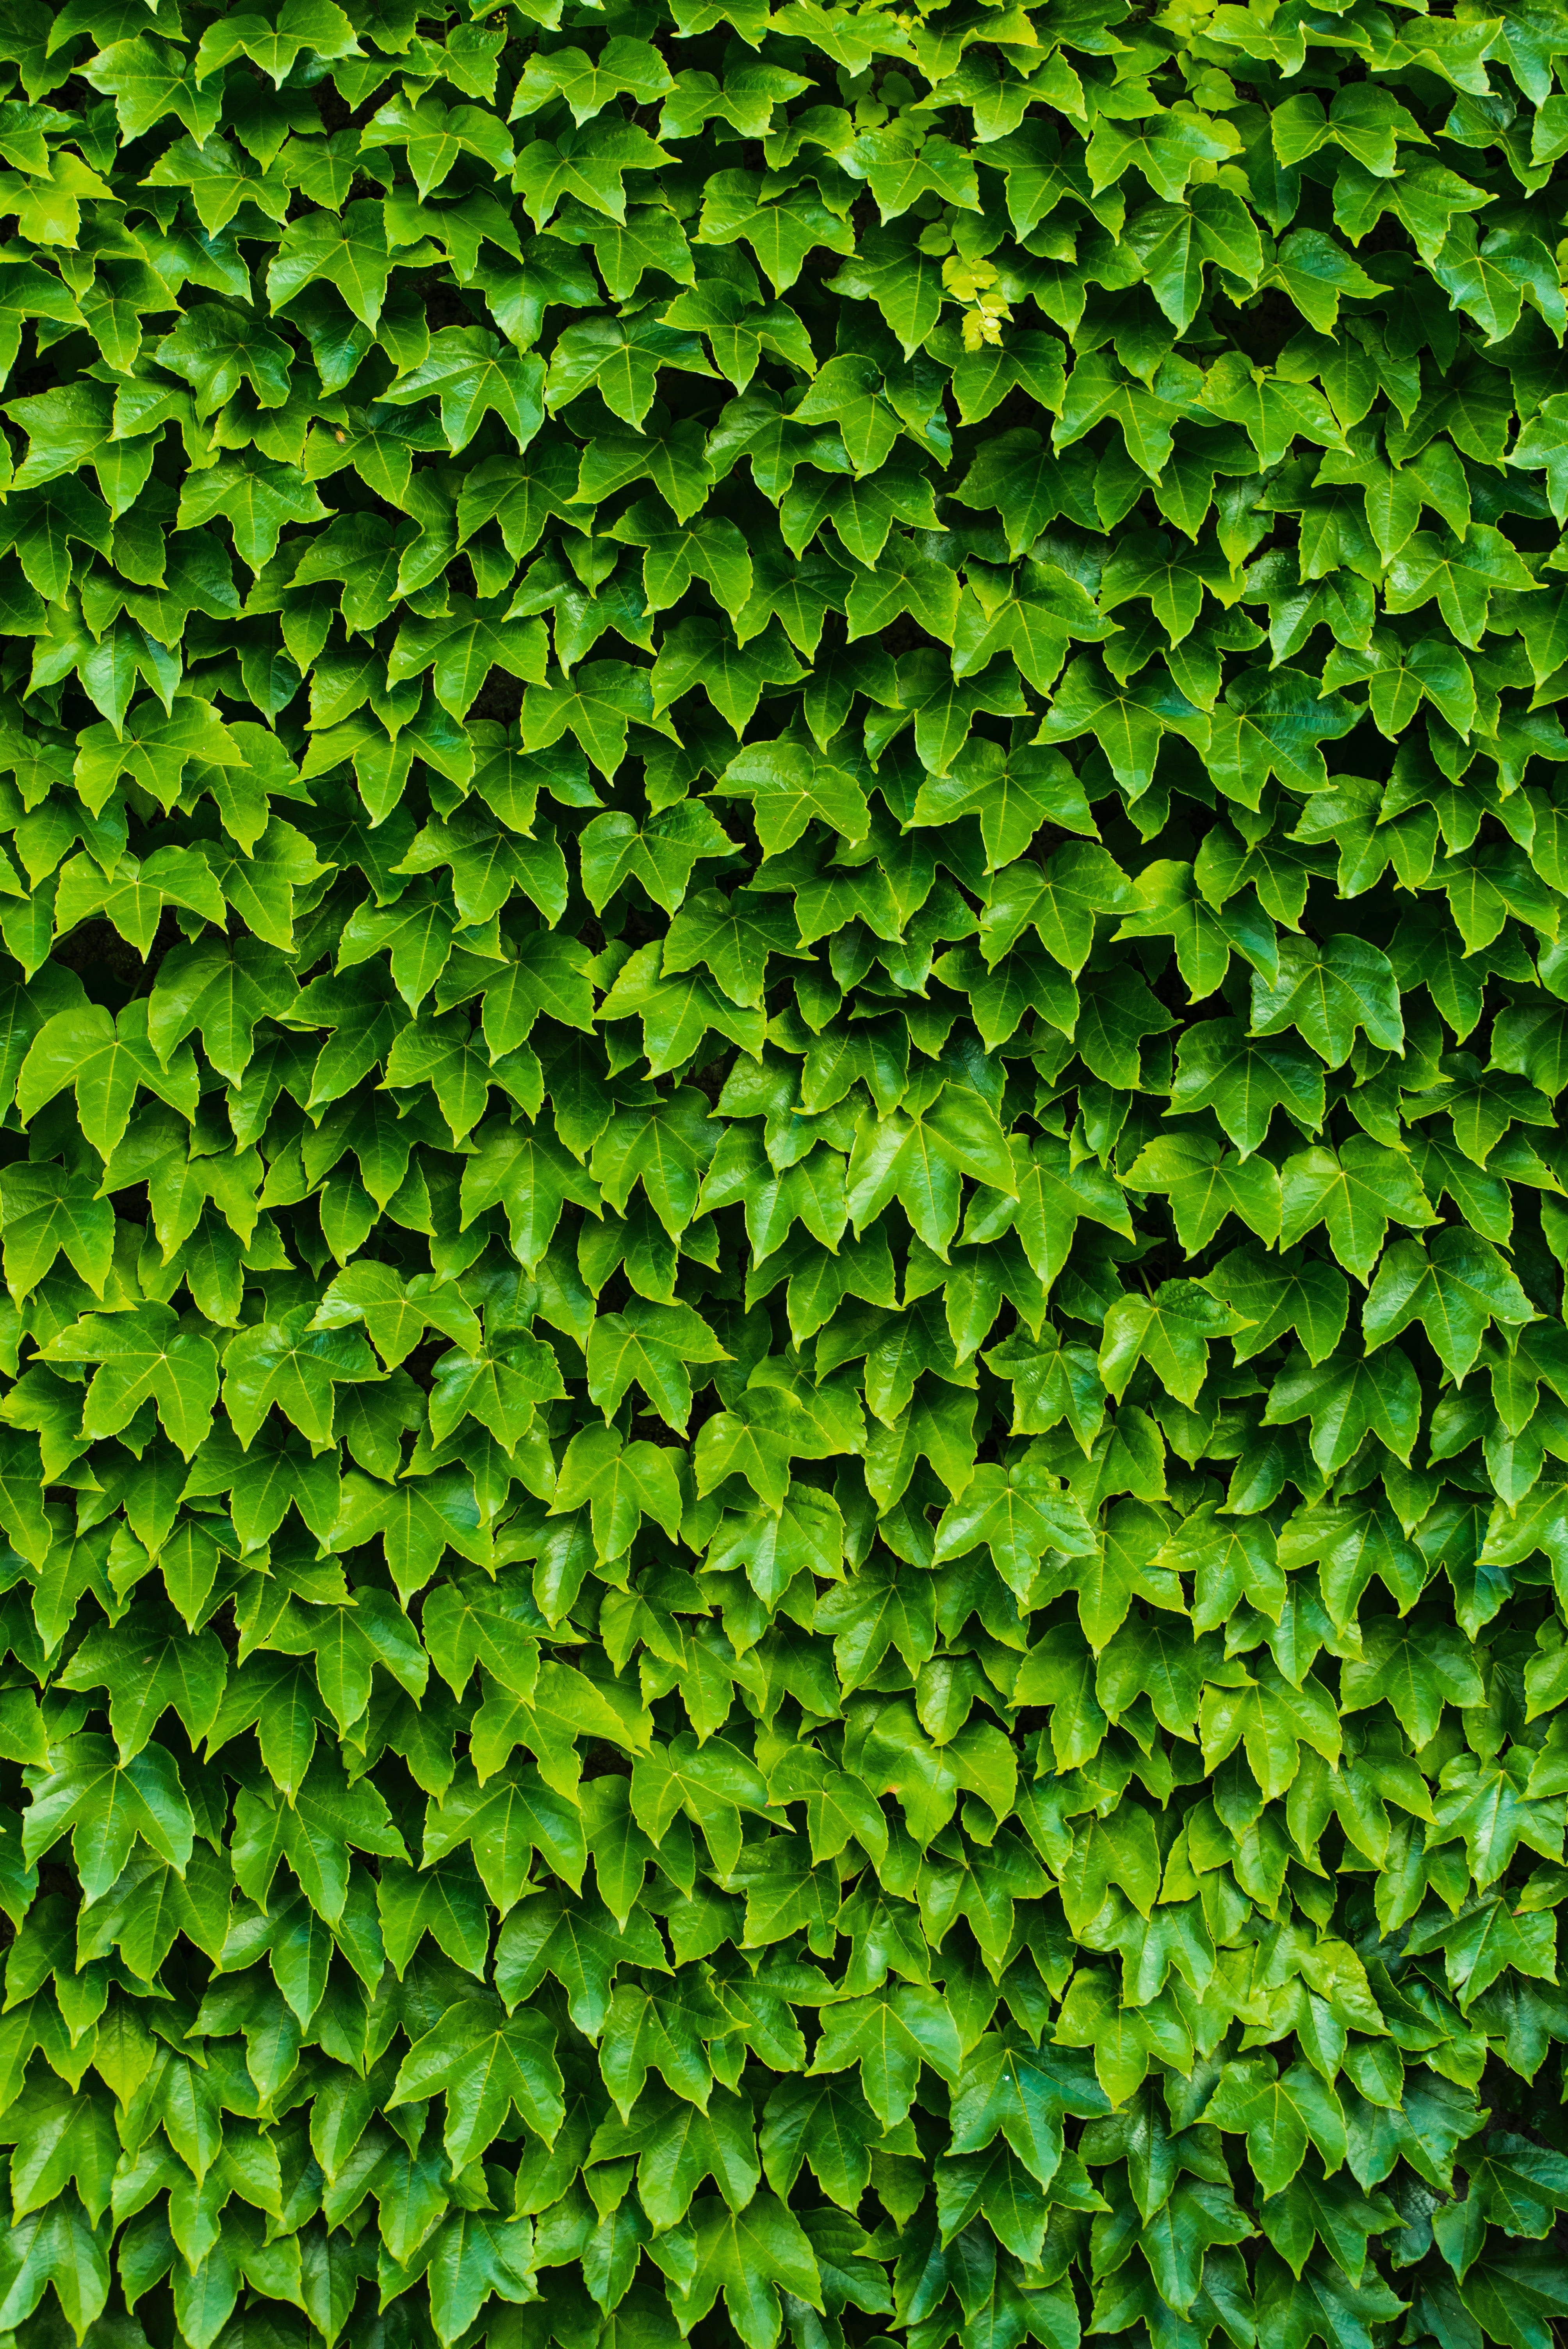 91800 download wallpaper foliage, nature, green, plant, carved screensavers and pictures for free